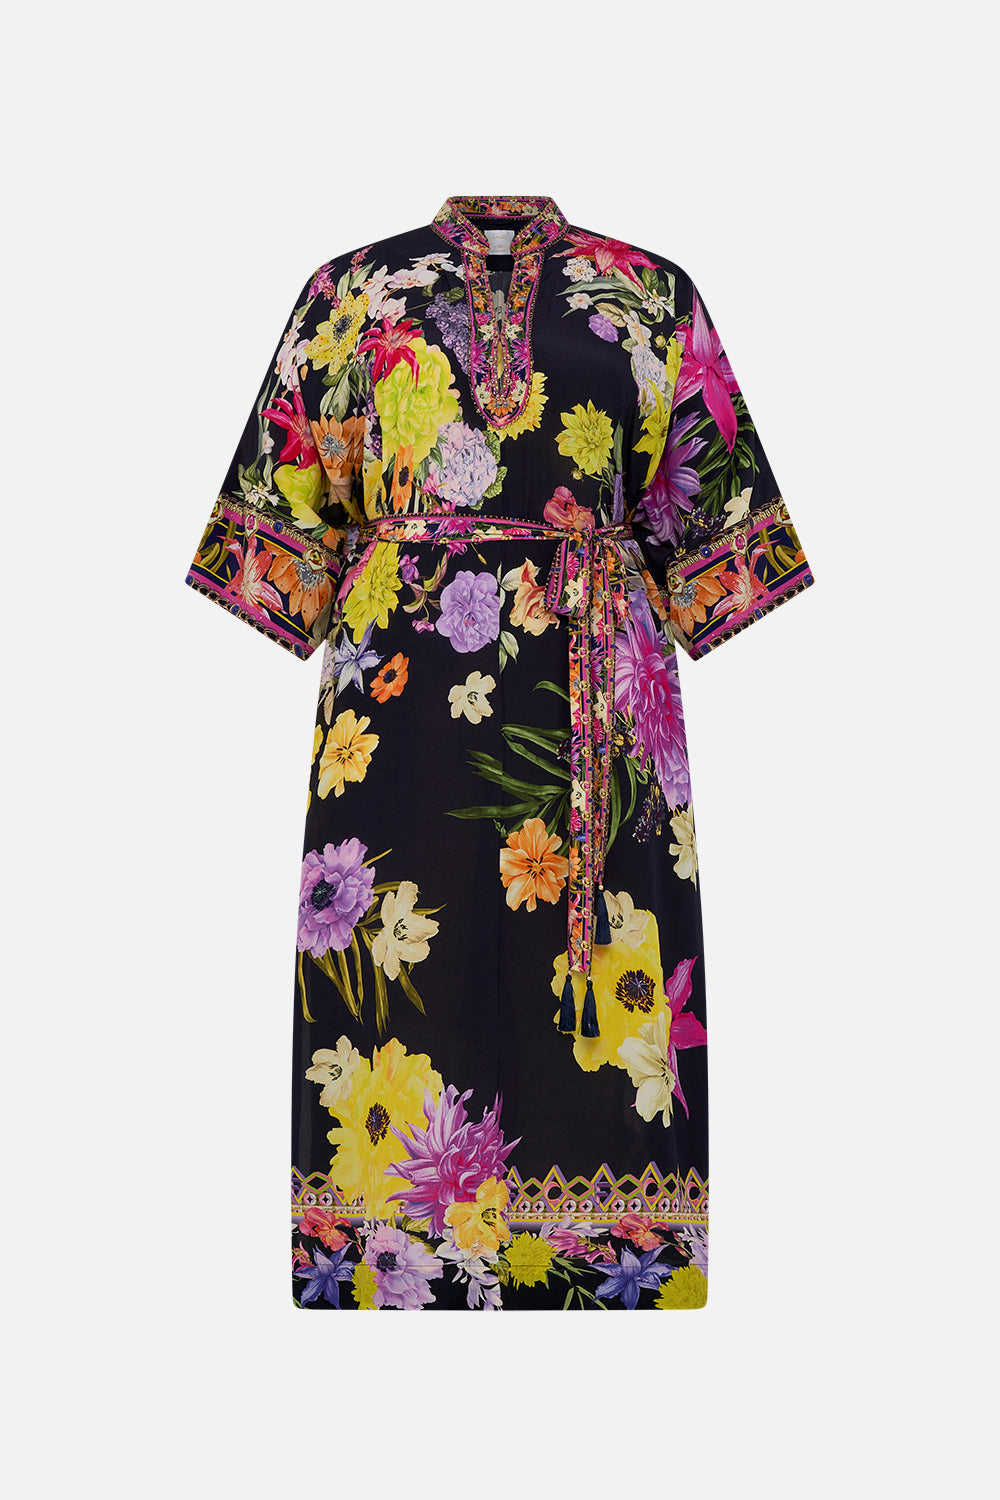 CAMILLA plus size floral silk kaftan in Peace Be With You print